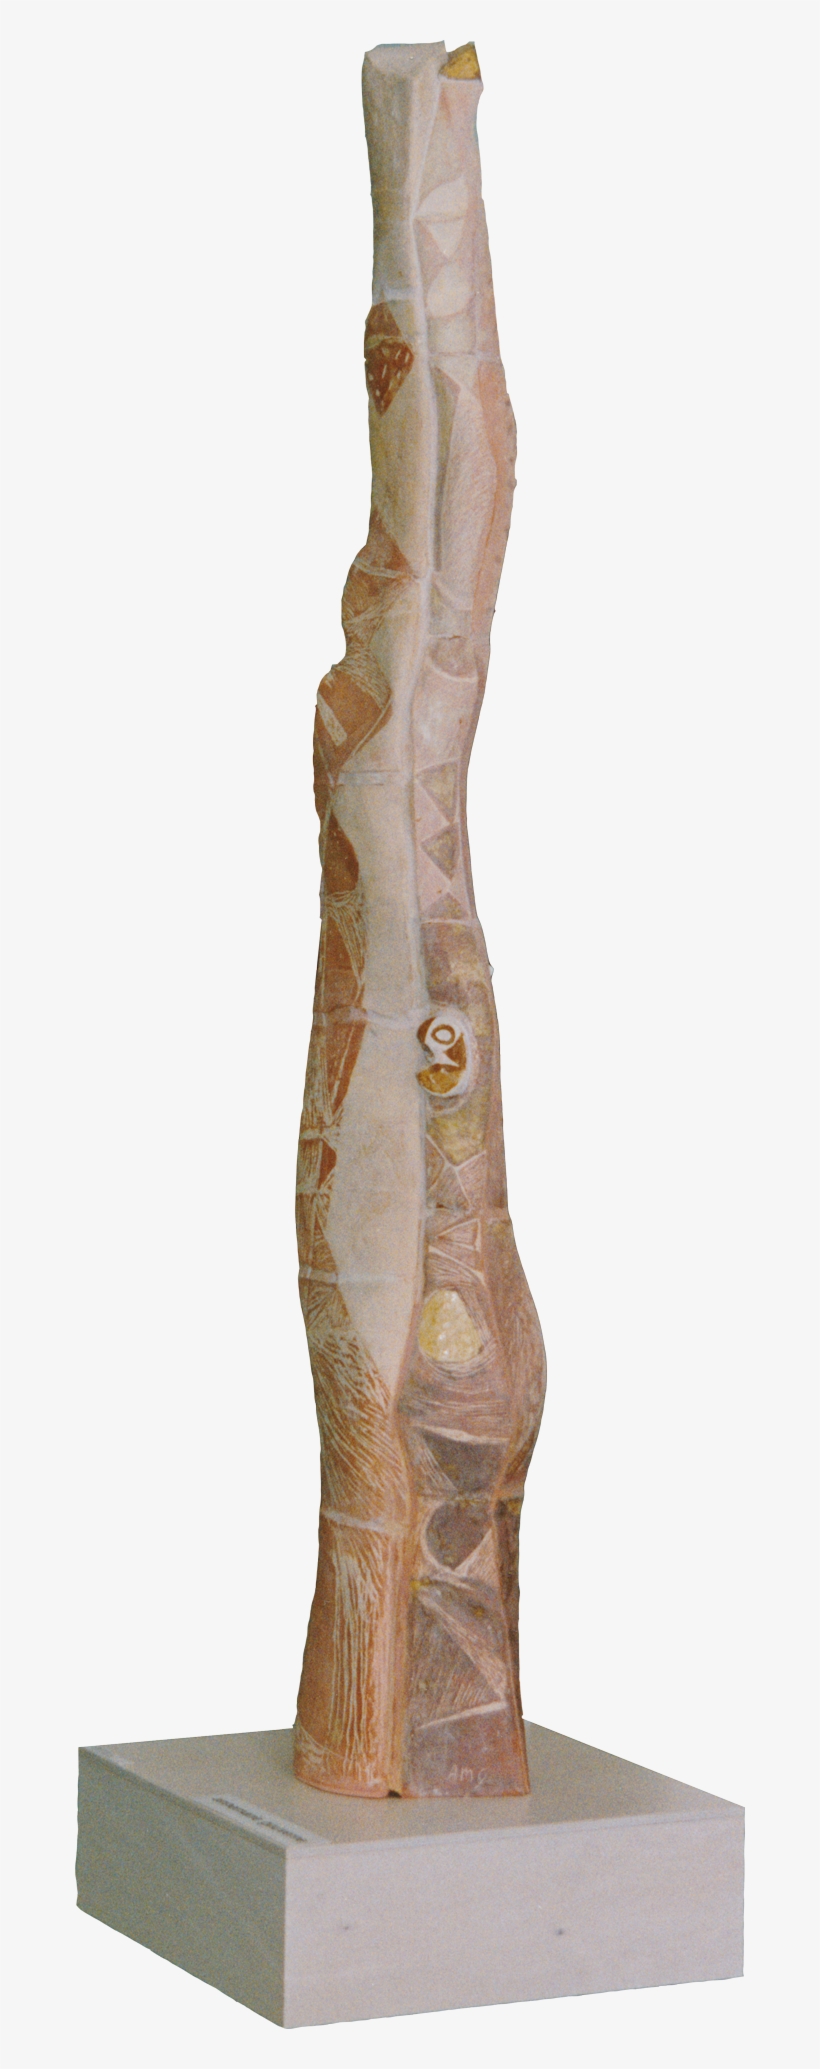 A Sculpture That Is Over Two Meters High With Several - Carving, transparent png #1696740